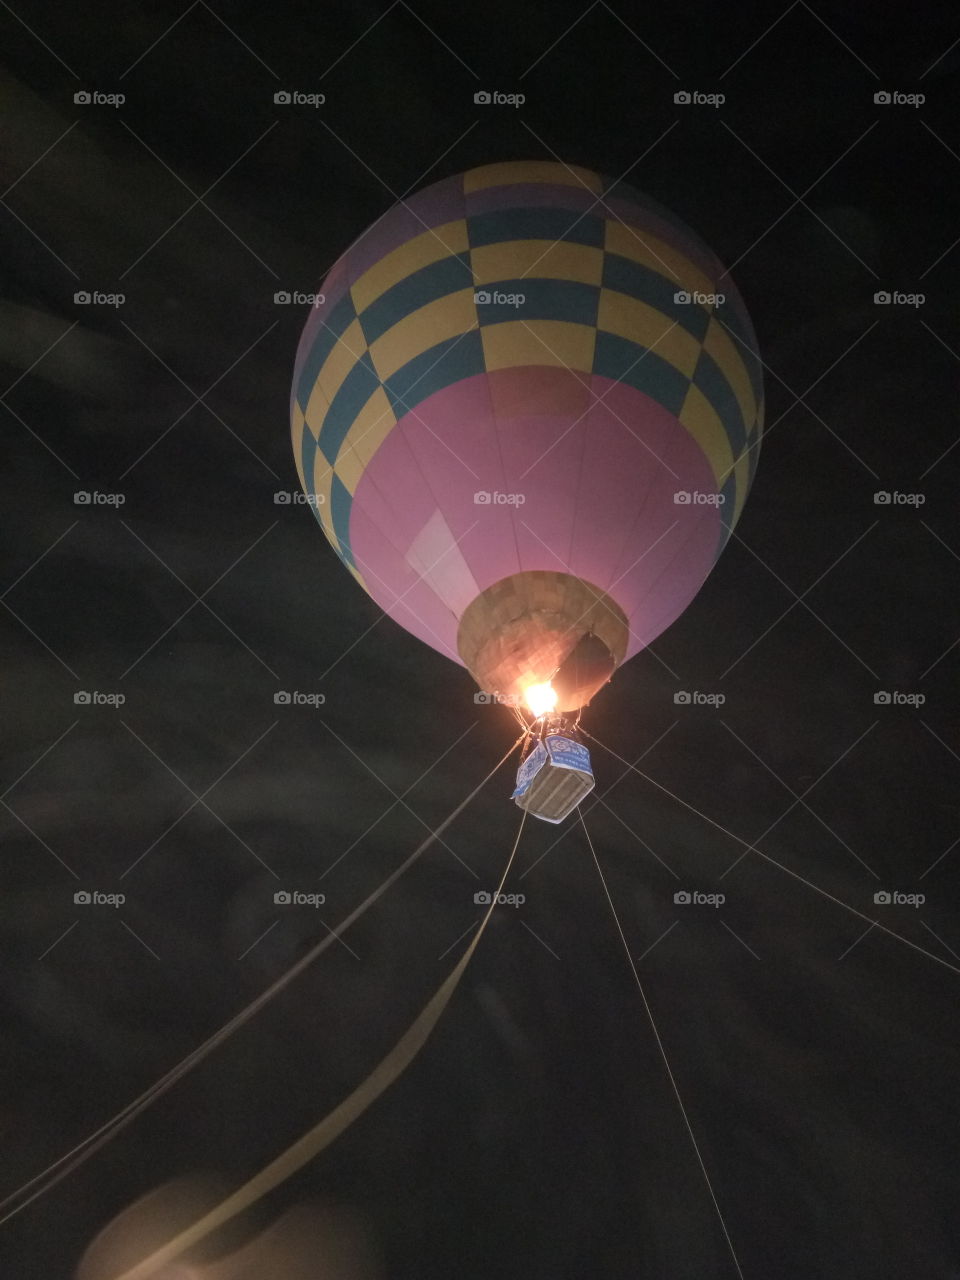 A hot air balloon is a lighter than air aircraft consisting of a bag, called an envelope, which contains heated air. Suspended beneath is a gondola or wicker basket (in some long-distance or high-altitude balloons, a capsule), which carries passengers and (usually) a source of heat, in most cases an open flame. The heated air inside the envelope makes it buoyant since it has a lower density than the colder air outside the envelope. As with all aircraft, hot air balloons cannot fly beyond the atmosphere. Unlike gas balloons, the envelope does not have to be sealed at the bottom, since the air near the bottom of the envelope is at the same pressure as the surrounding air. In modern sport balloons the envelope is generally made from nylon fabric and the inlet of the balloon (closest to the burner flame) is made from a fire resistant material such as Nomex. Modern balloons have been made in all kinds of shapes, such as rocket ships and the shapes of various commercial products, though the traditional shape is used for most non-commercial, and many commercial, applications.

The hot air balloon is the first successful human-carrying flight technology. The first untethered manned hot air balloon flight was performed by Jean-François Pilâtre de Rozierand François Laurent d'Arlandes on November 21, 1783, in Paris, France,[1] in a balloon created by the Montgolfier brothers.[2] The first hot-air balloon flown in the Americas was launched from the Walnut Street Jail in Philadelphia on January 9, 1793 by the French aeronaut Jean Pierre Blanchard.[3] Hot air balloons that can be propelled through the air rather than simply drifting with the wind are known as thermal airships.
A hot air balloon is a lighter than air aircraft consisting of a bag, called an envelope, which contains heated air. Suspended beneath is a gondola or wicker basket (in some long-distance or high-altitude balloons, a capsule), which carries passengers and (usually) a source of heat, in most cases an open..